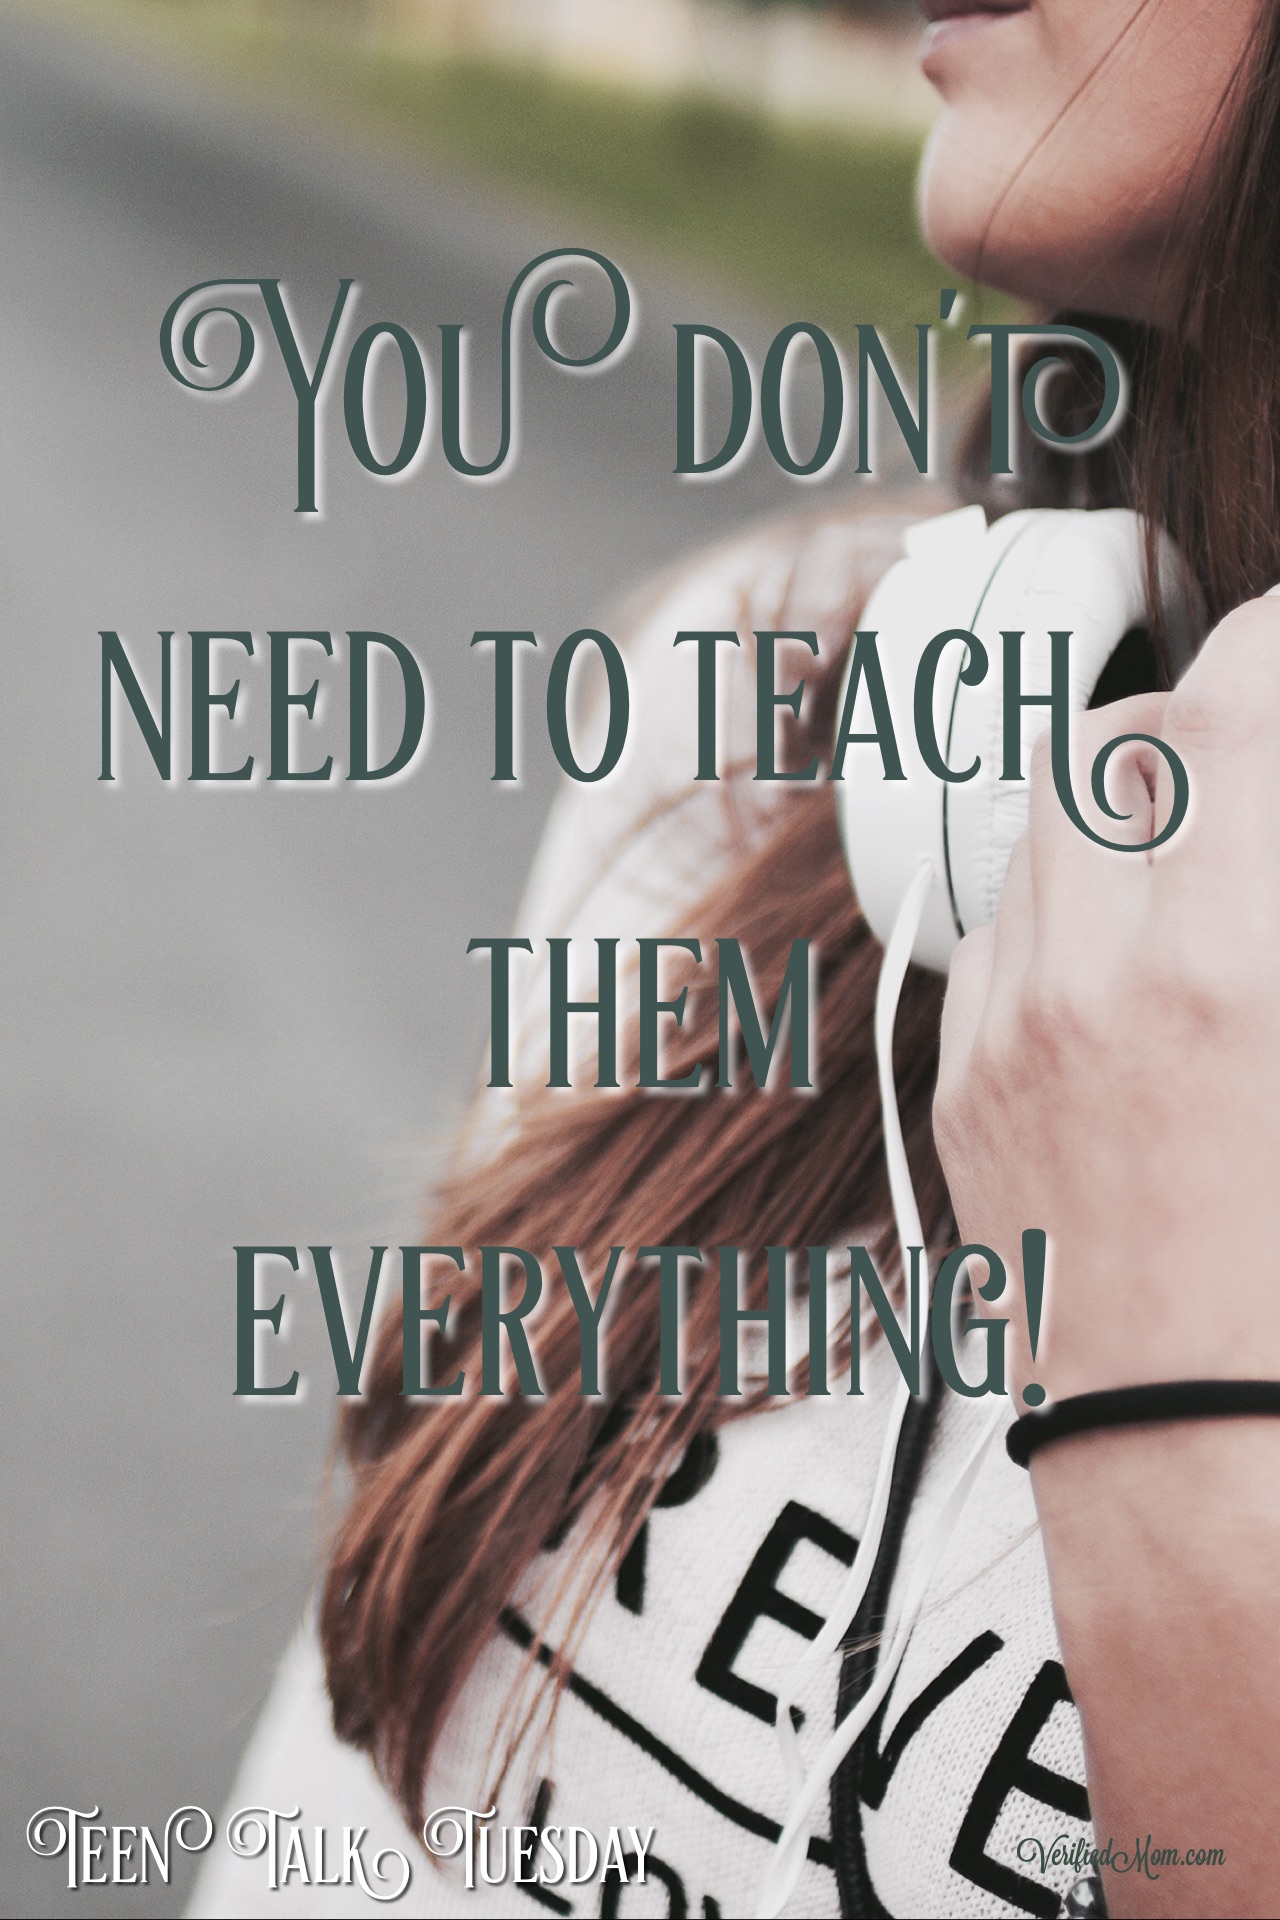 Teen Talk Tuesday - You don't have to teach them everything